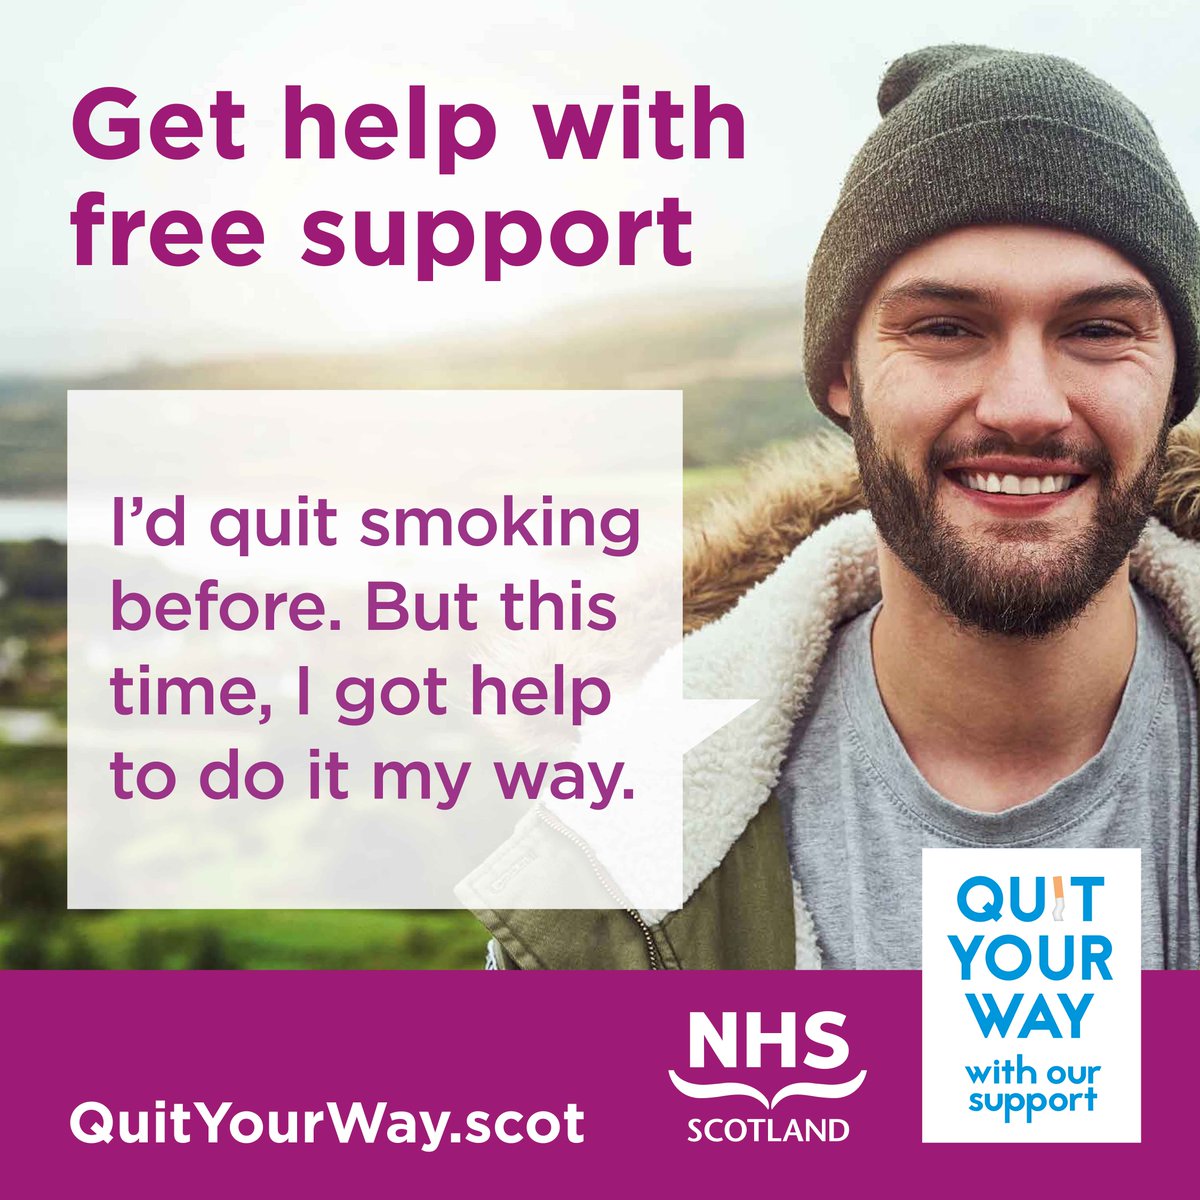 Quitting smoking isn’t easy. Often it can take a few attempts. Get help with free support. With #QuitYourWay you’re more likely to stop – and stay stopped. Get started and self-refer at tinyurl.com/qywlothian